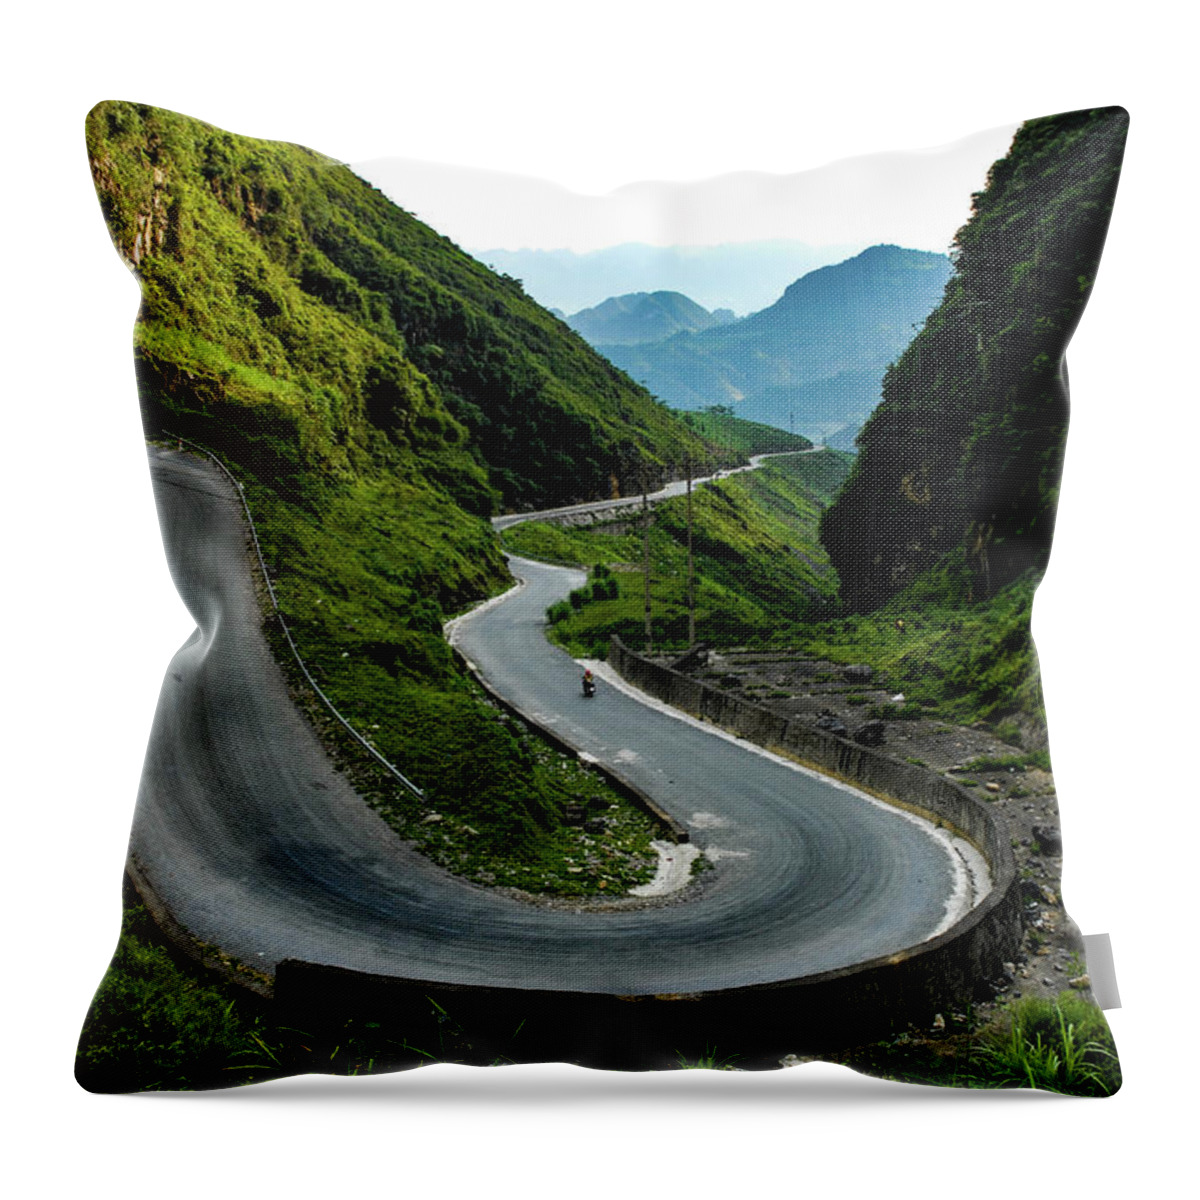 Northern Throw Pillow featuring the photograph Memory Lane - Ha Giang Province, Northern Vietnam by Earth And Spirit